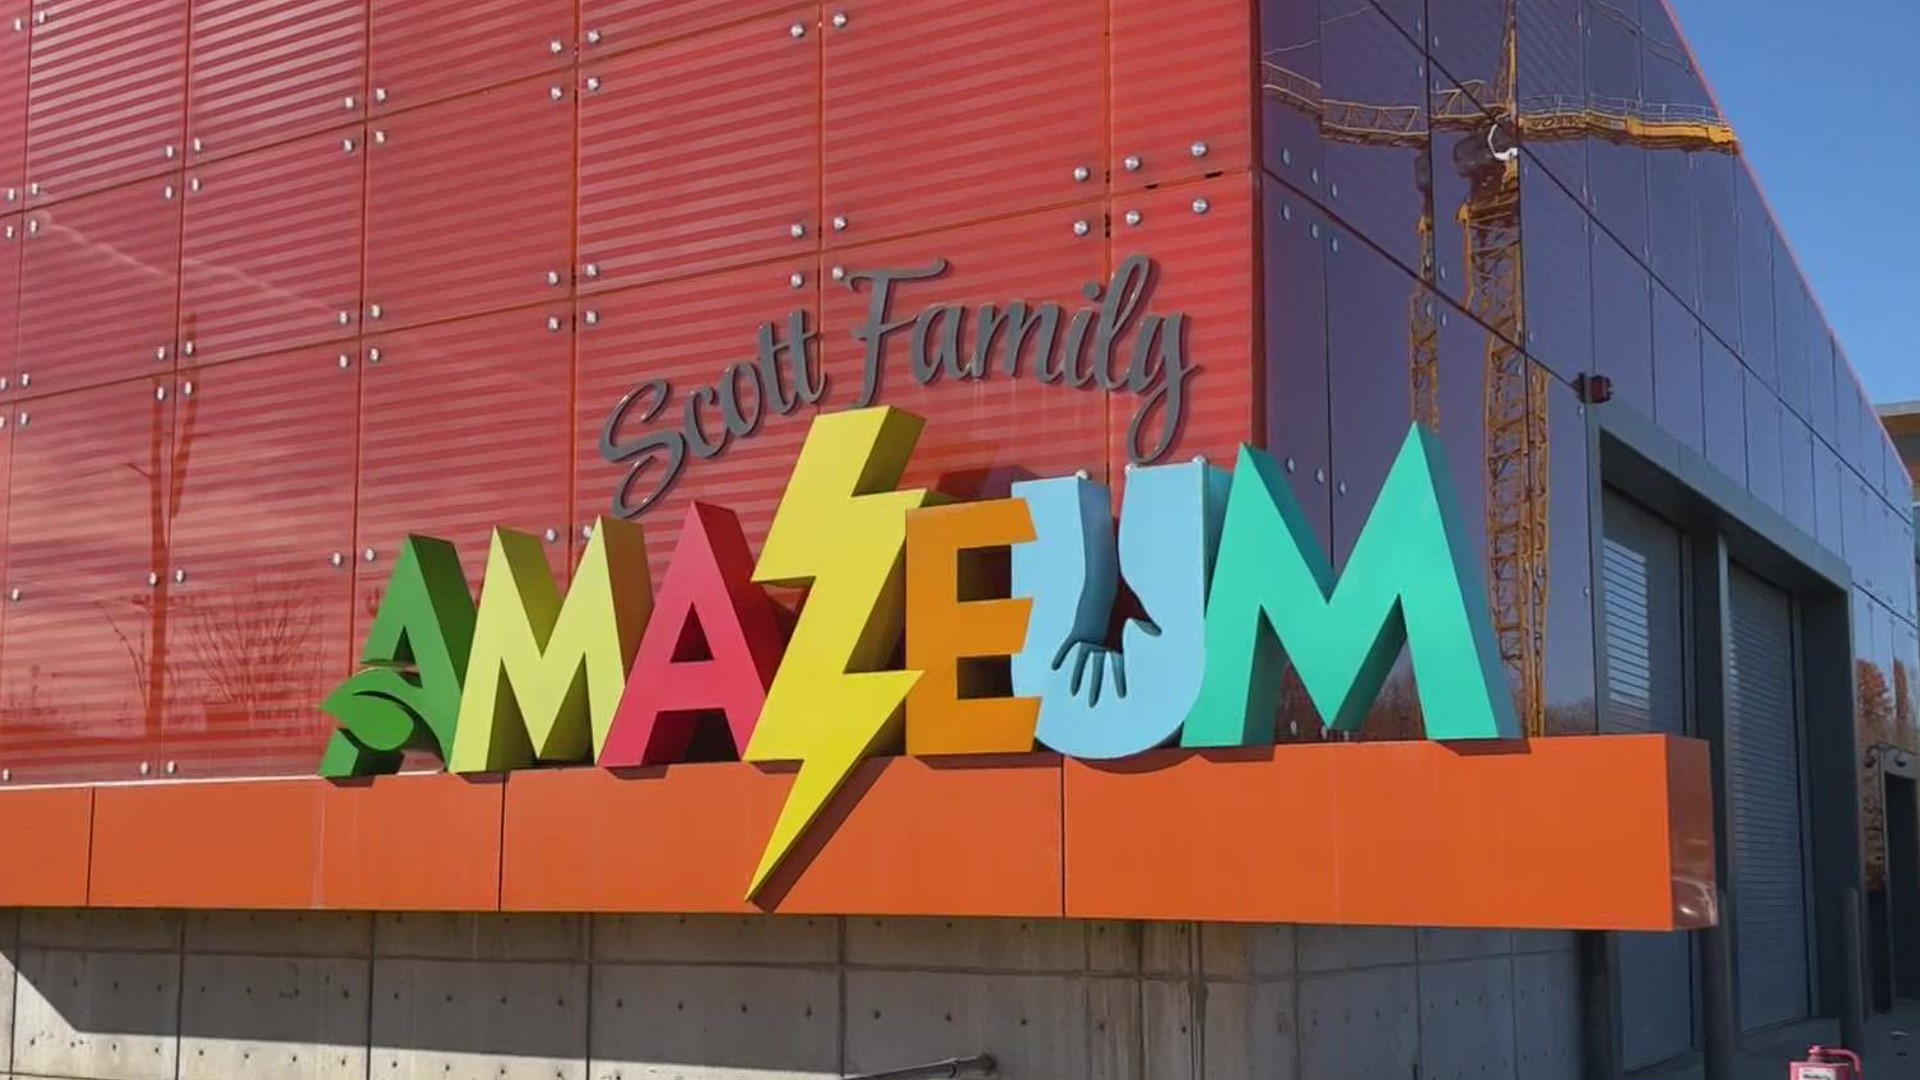 The Scott Family Amazeum is an ideal spot for family-fun and spontaneous field trips!